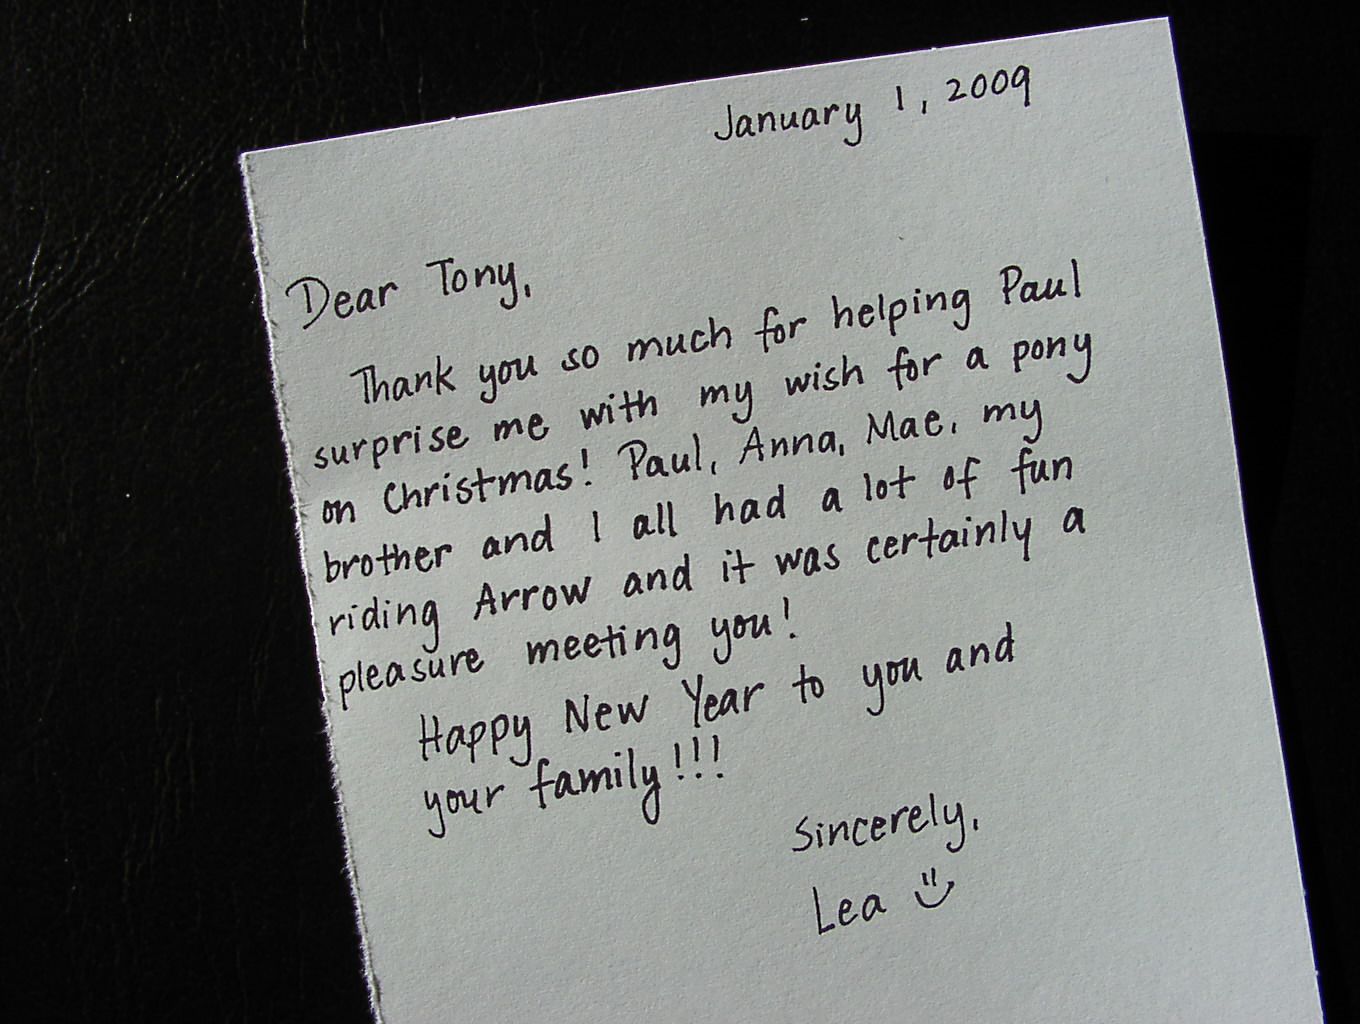 CountryTime Pony Rides - Customer Letter 3